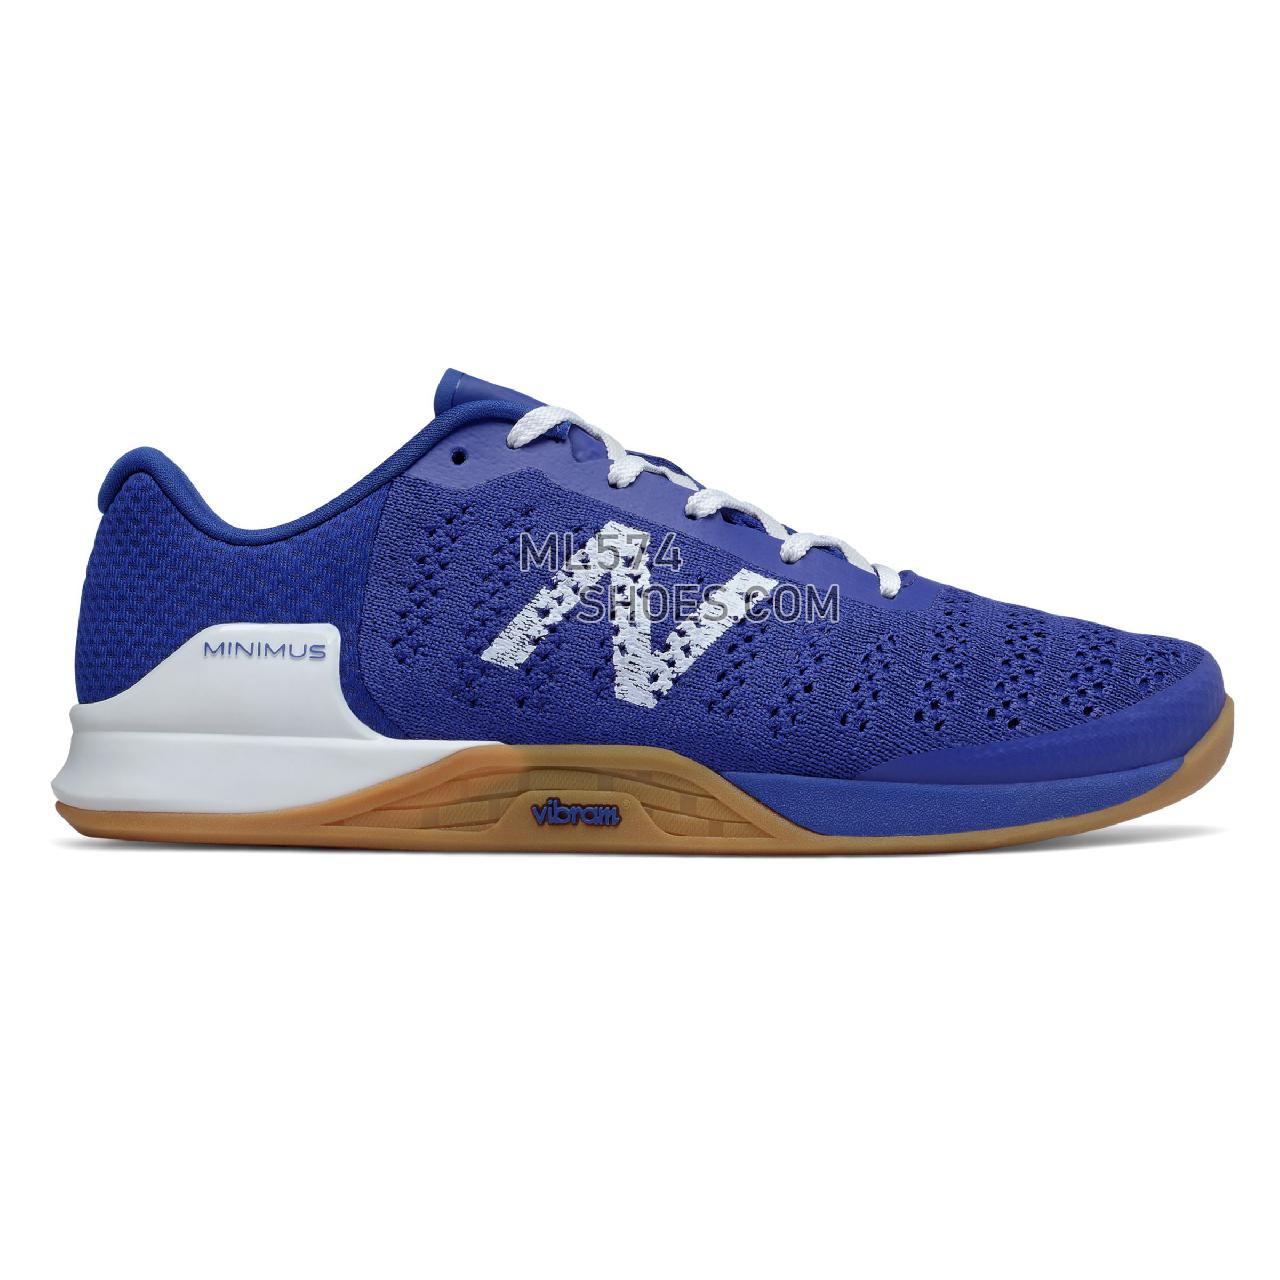 New Balance Minimus Prevail - Men's Cross-Training - Team Royal with White and Gum - MXMPRB1